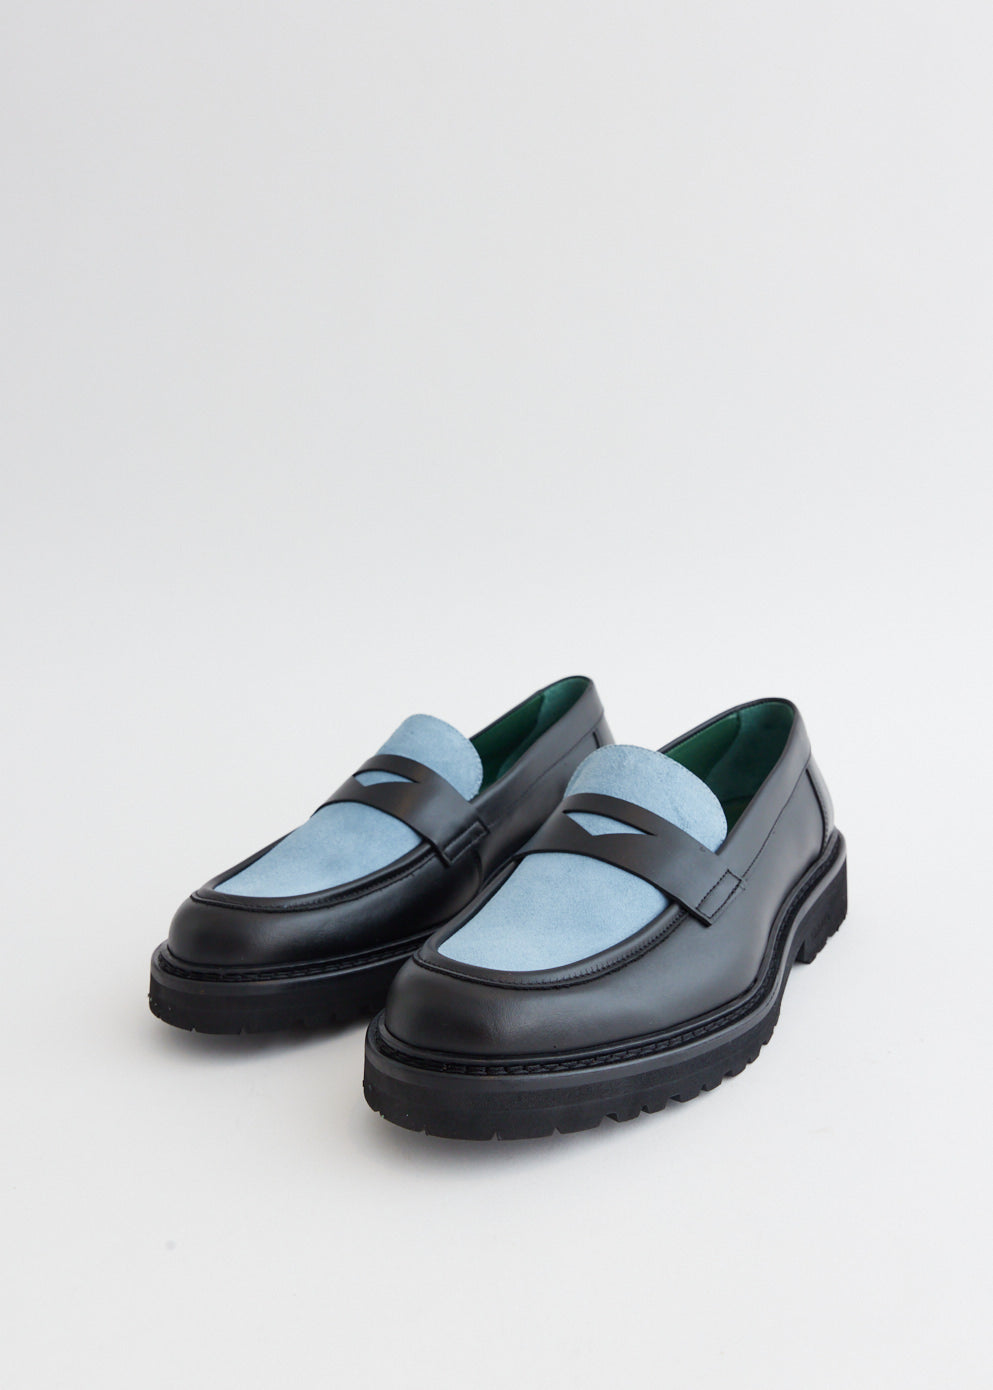 Richee Two-Tone Penny Loafers